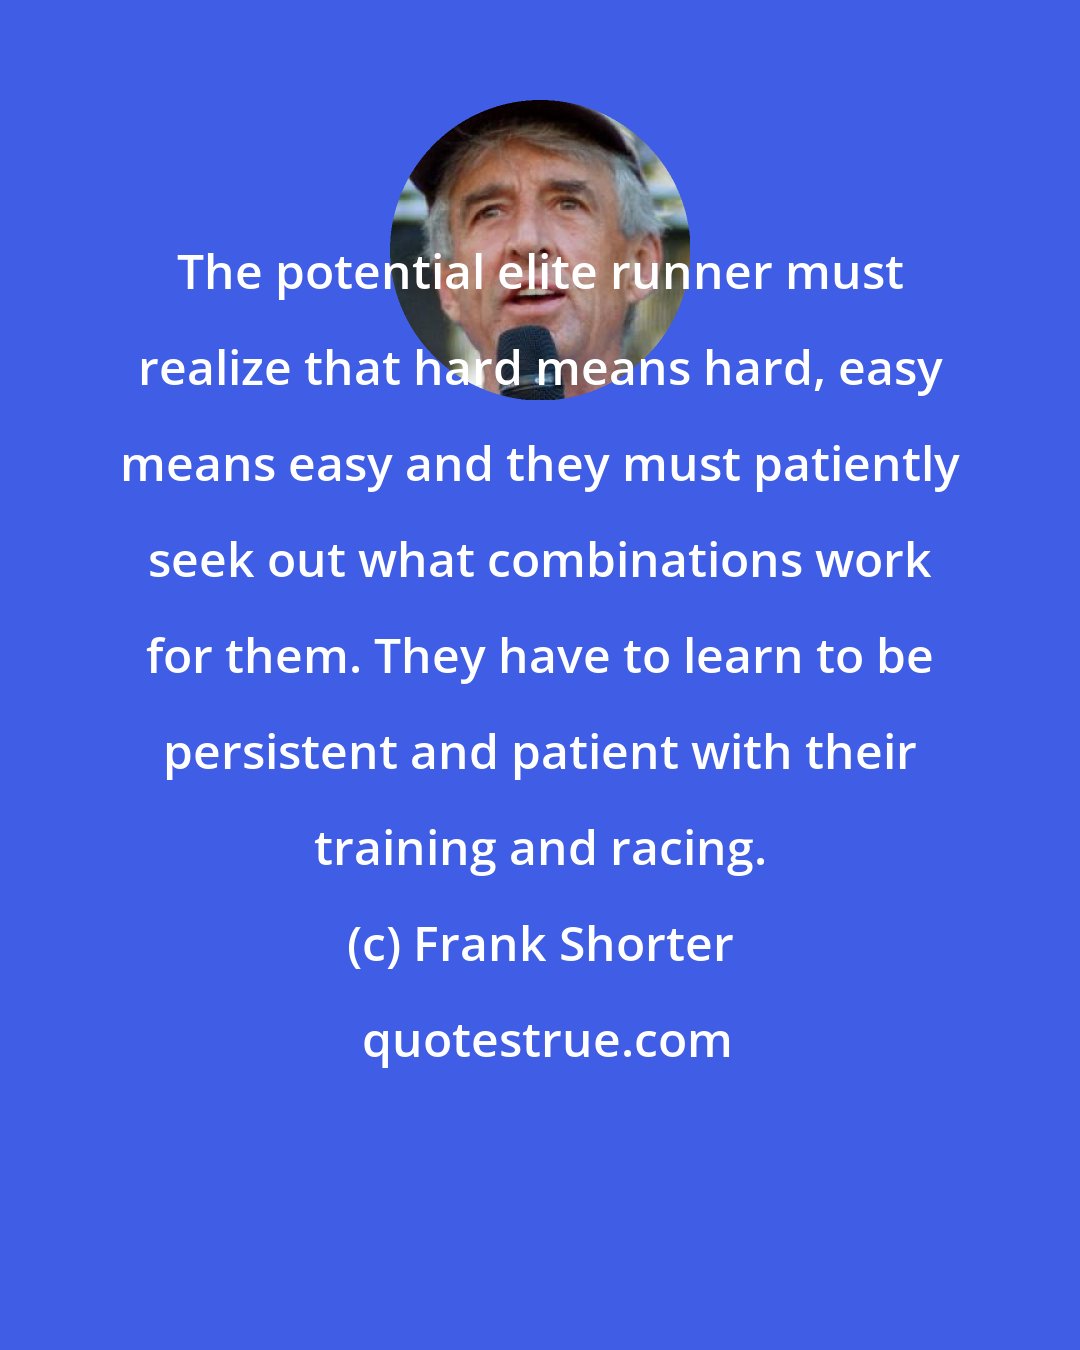 Frank Shorter: The potential elite runner must realize that hard means hard, easy means easy and they must patiently seek out what combinations work for them. They have to learn to be persistent and patient with their training and racing.